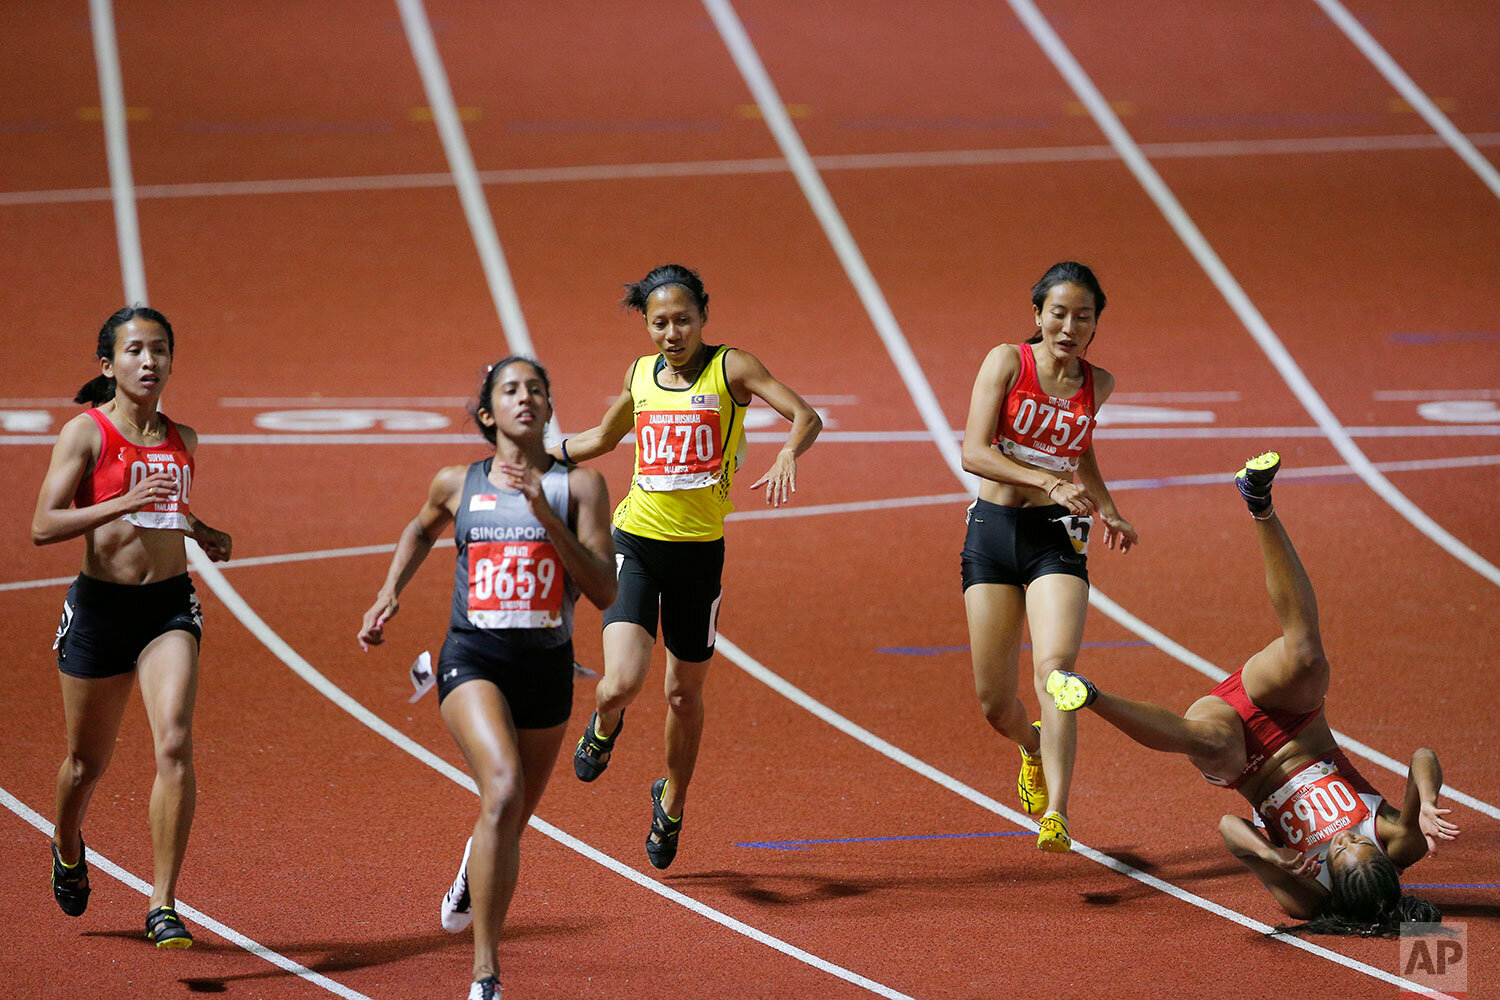   Philippine's Kristina Marie,right, falls down in the women's 100m final during the athletics competition at the 30th Southeast Asian Games at Athletics Stadium in New Clark City, Tarlac province, northern Philippines on Sunday, Dec. 8, 2019. The So